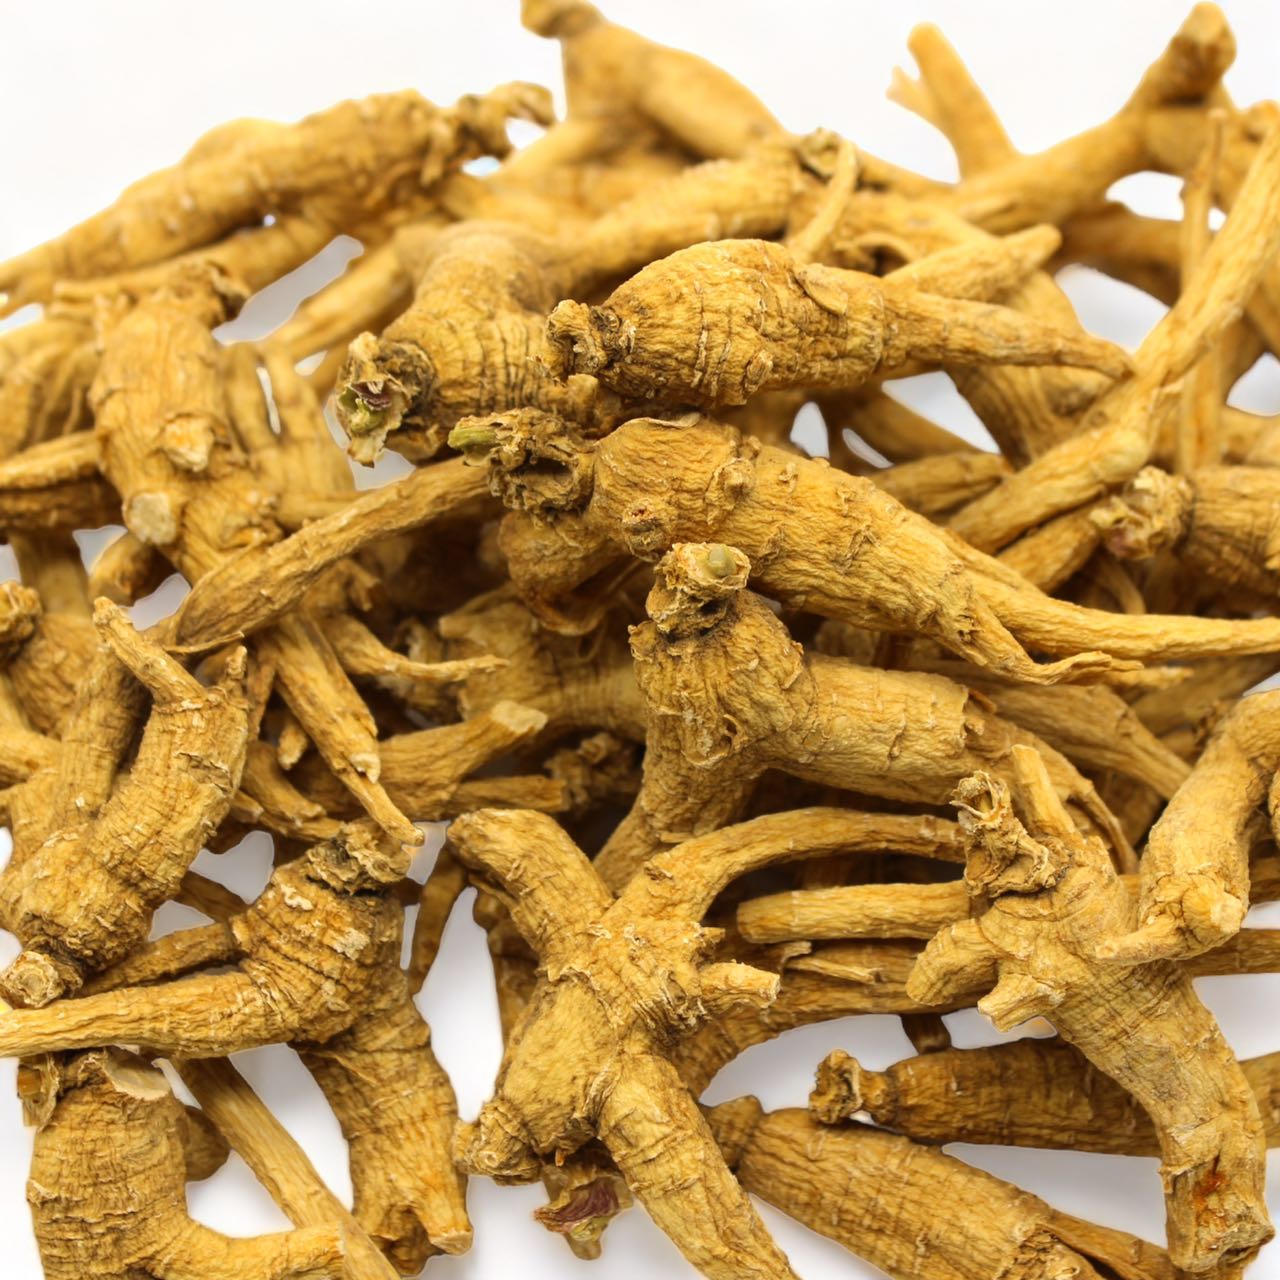 "NATIVE ULTRA" 5-Year Premium Canadian Ginseng Whole Roots, 454g/bag